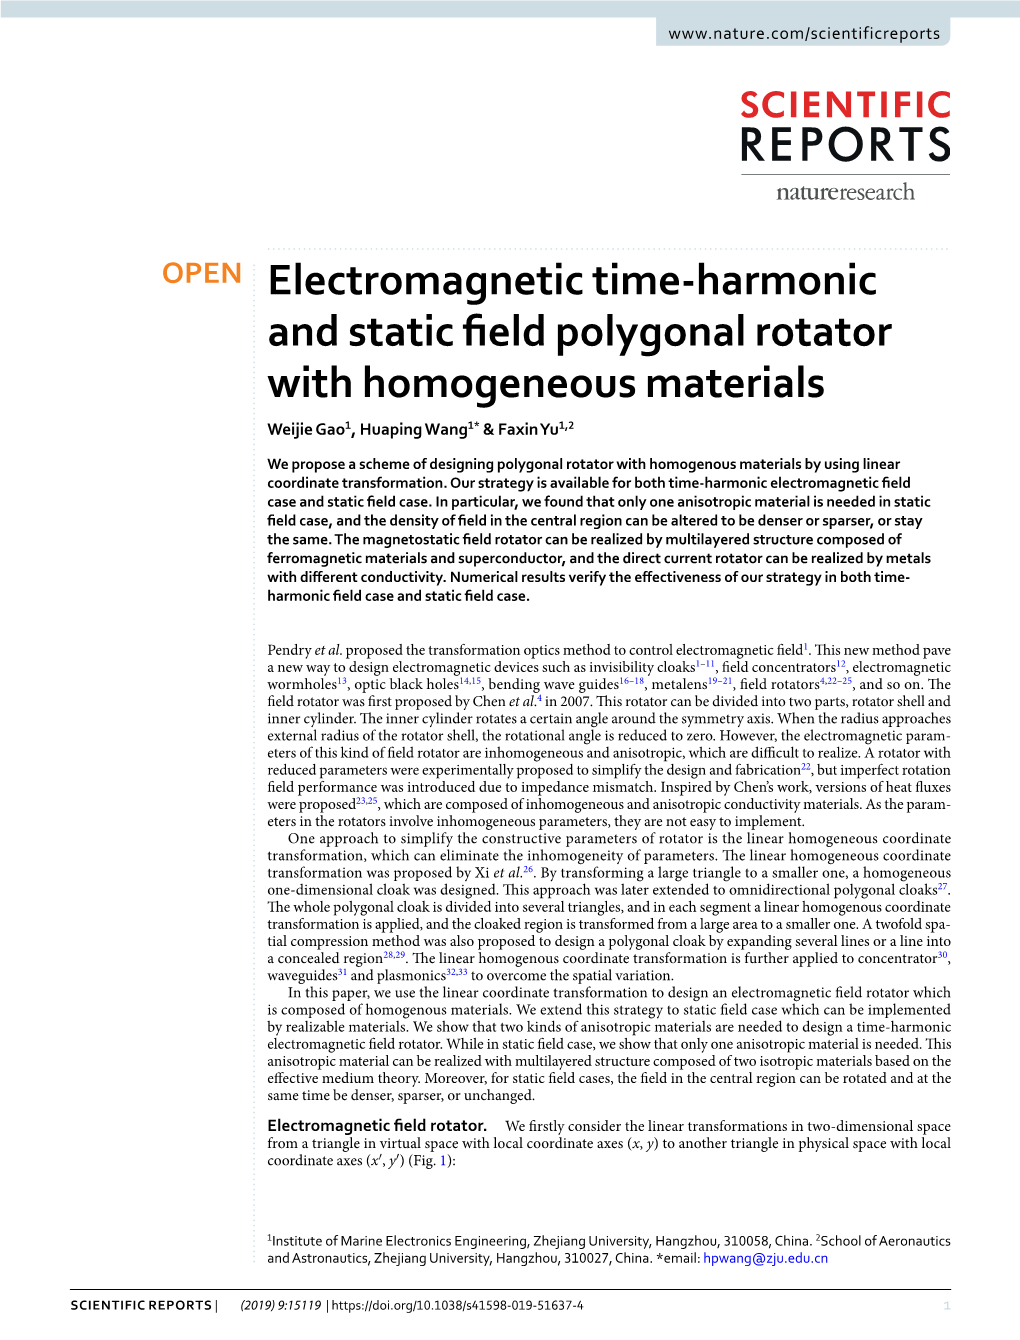 Electromagnetic Time-Harmonic and Static Field Polygonal Rotator With